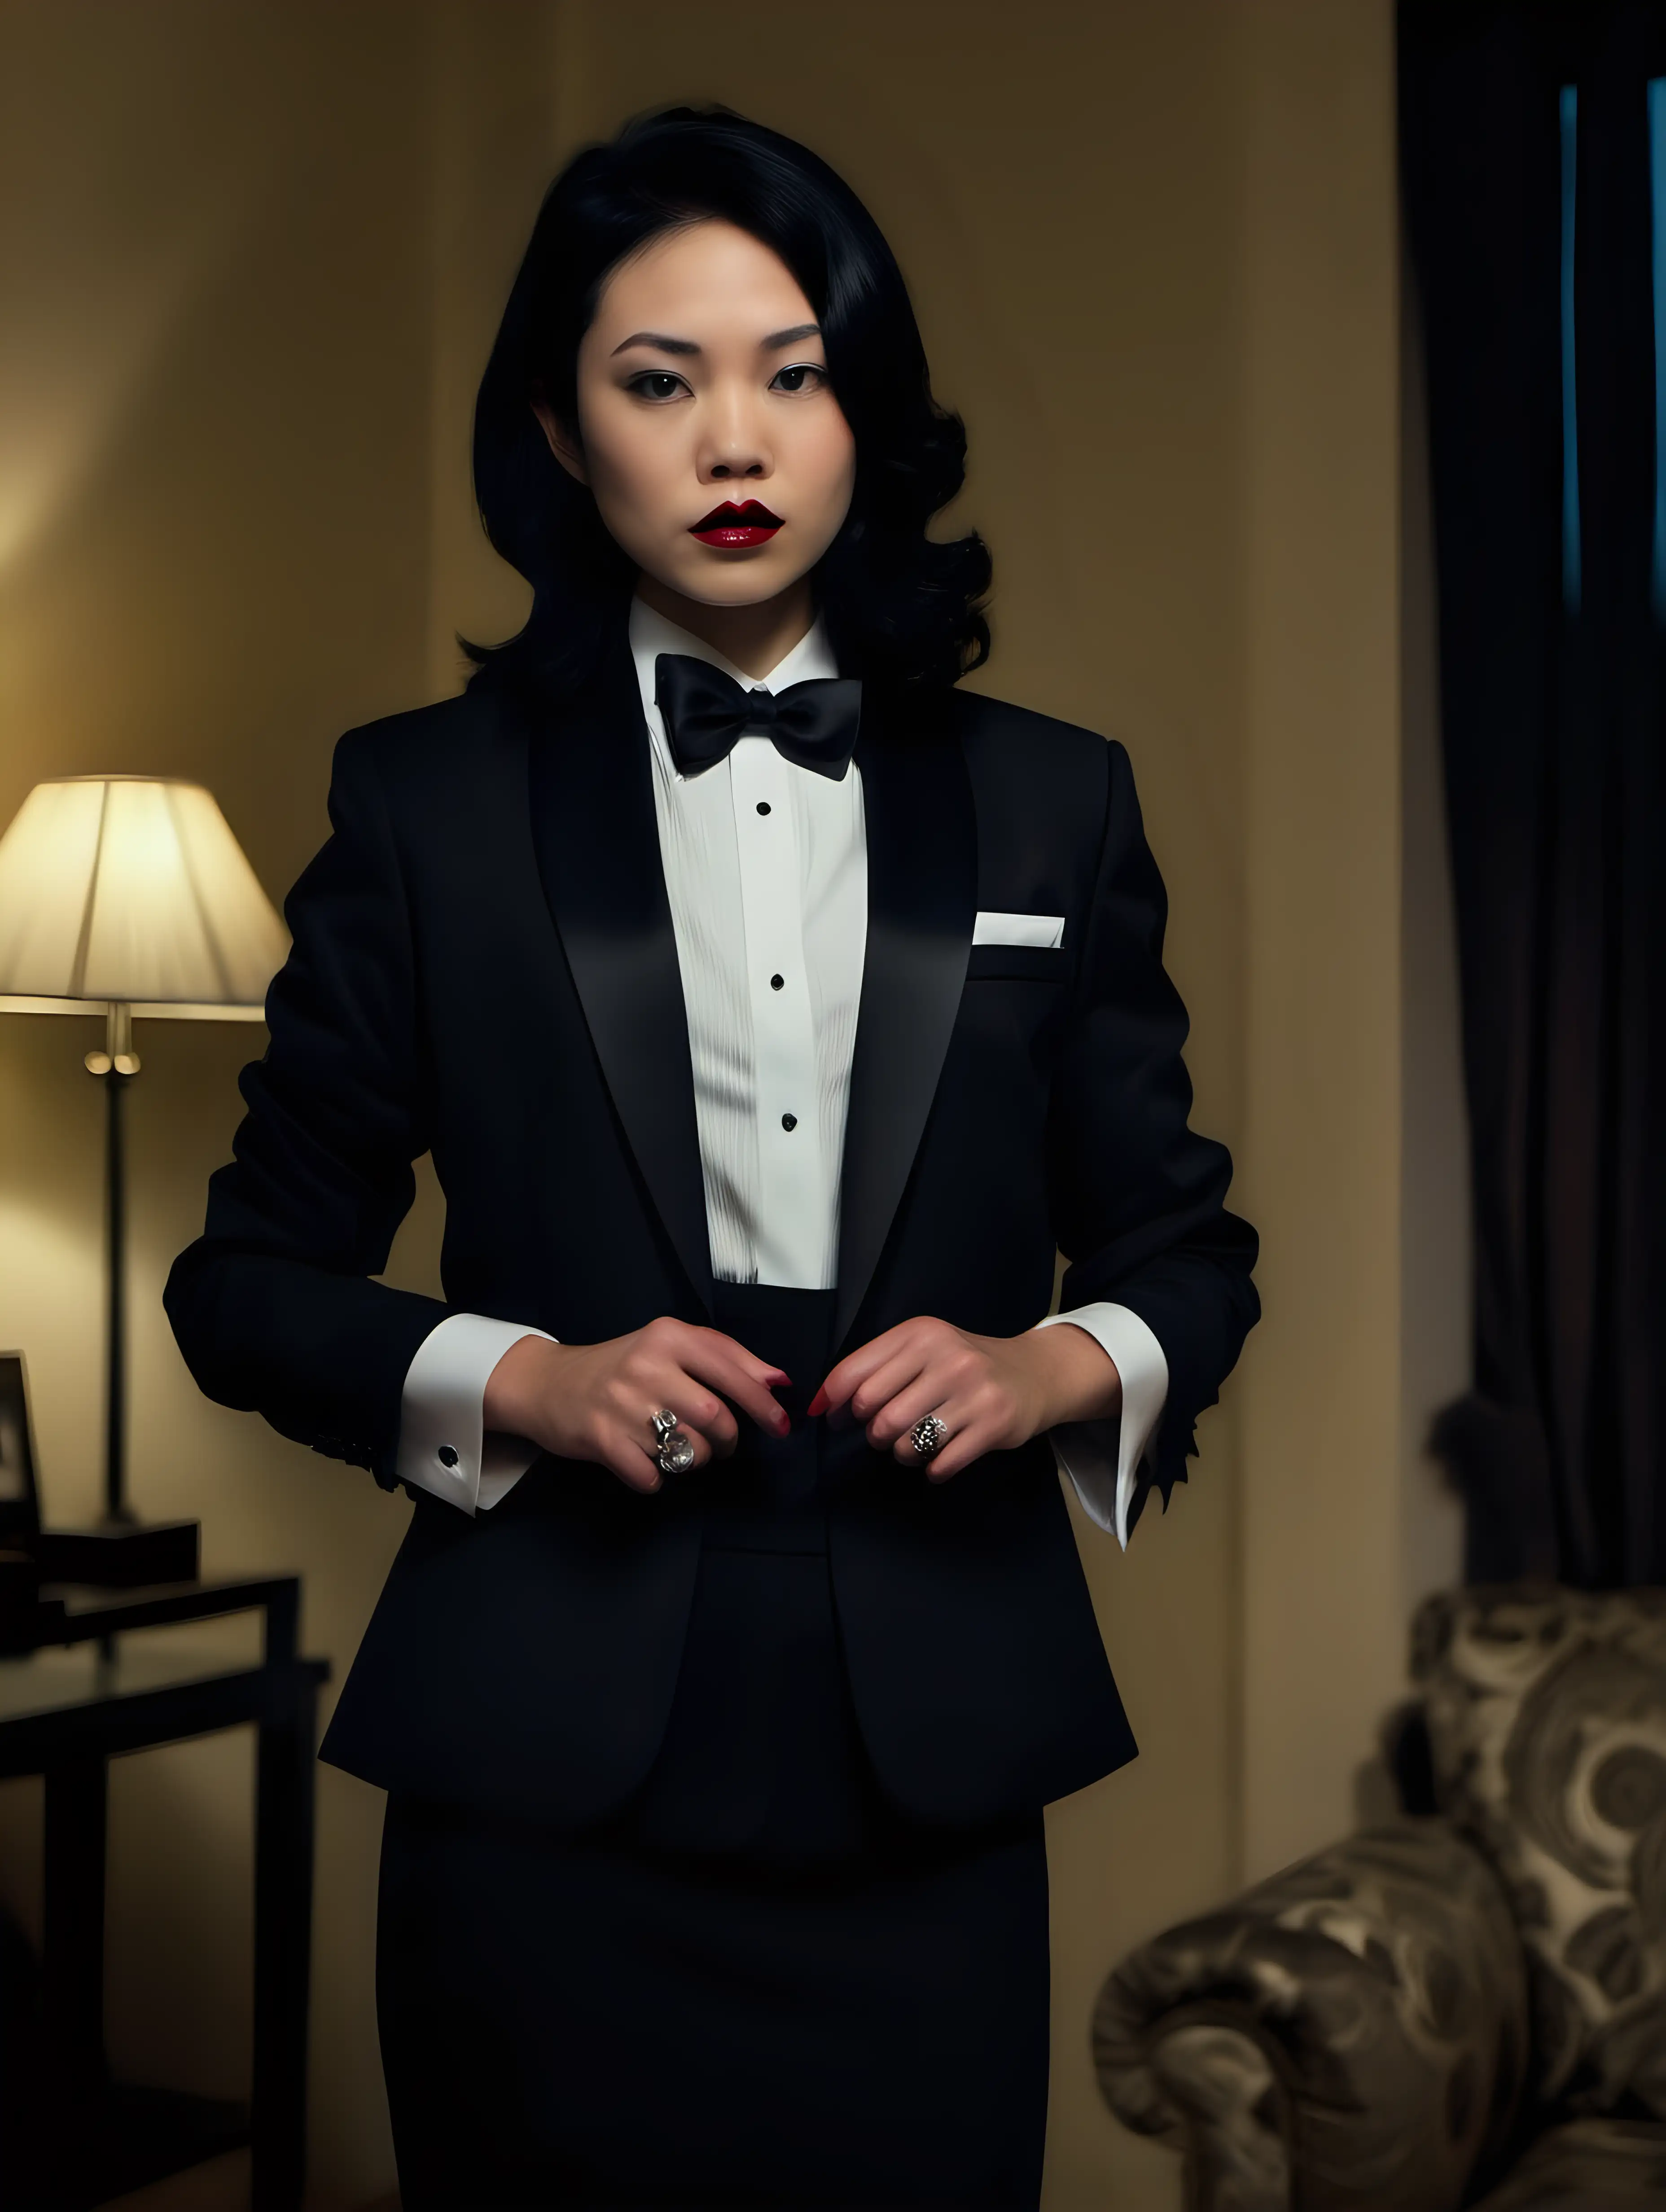 Stern Vietnamese woman with shoulder length black hair and lipstick wearing a tuxedo with a black bow tie is standing in a room at night. Her shirt has double french cuffs. She has cufflinks. Her jacket is open and has a corsage.